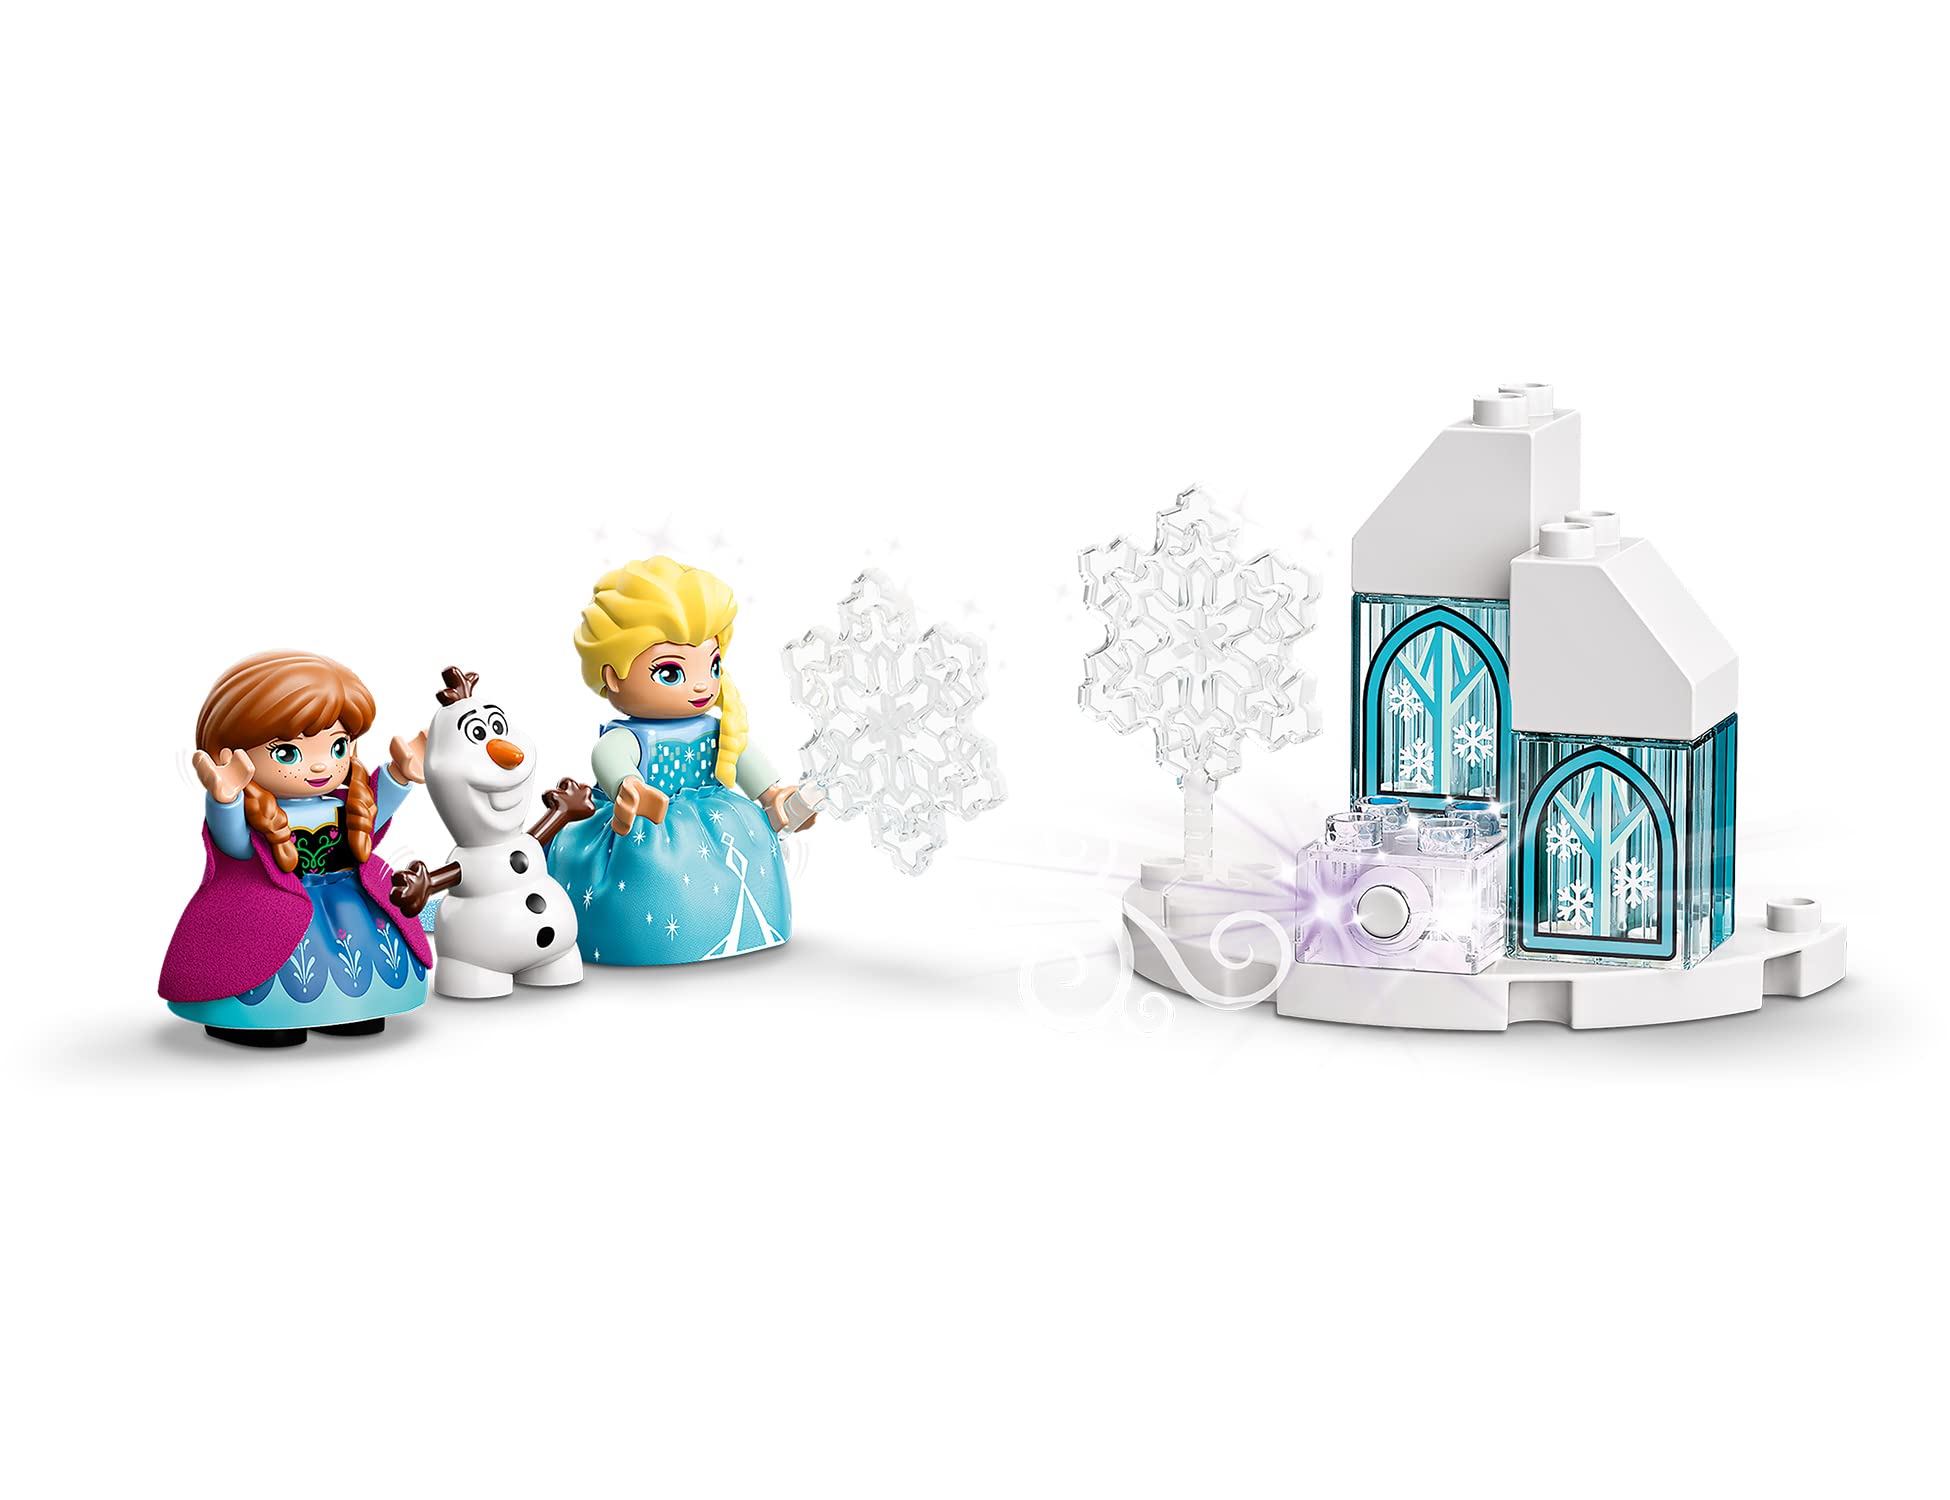 Lego 10899 DUPLO Disney Frozen Ice Castle Princess Elsa and Anna Mini Dolls and Snowman Figure Toys for 2 Years Old Girl and Boy